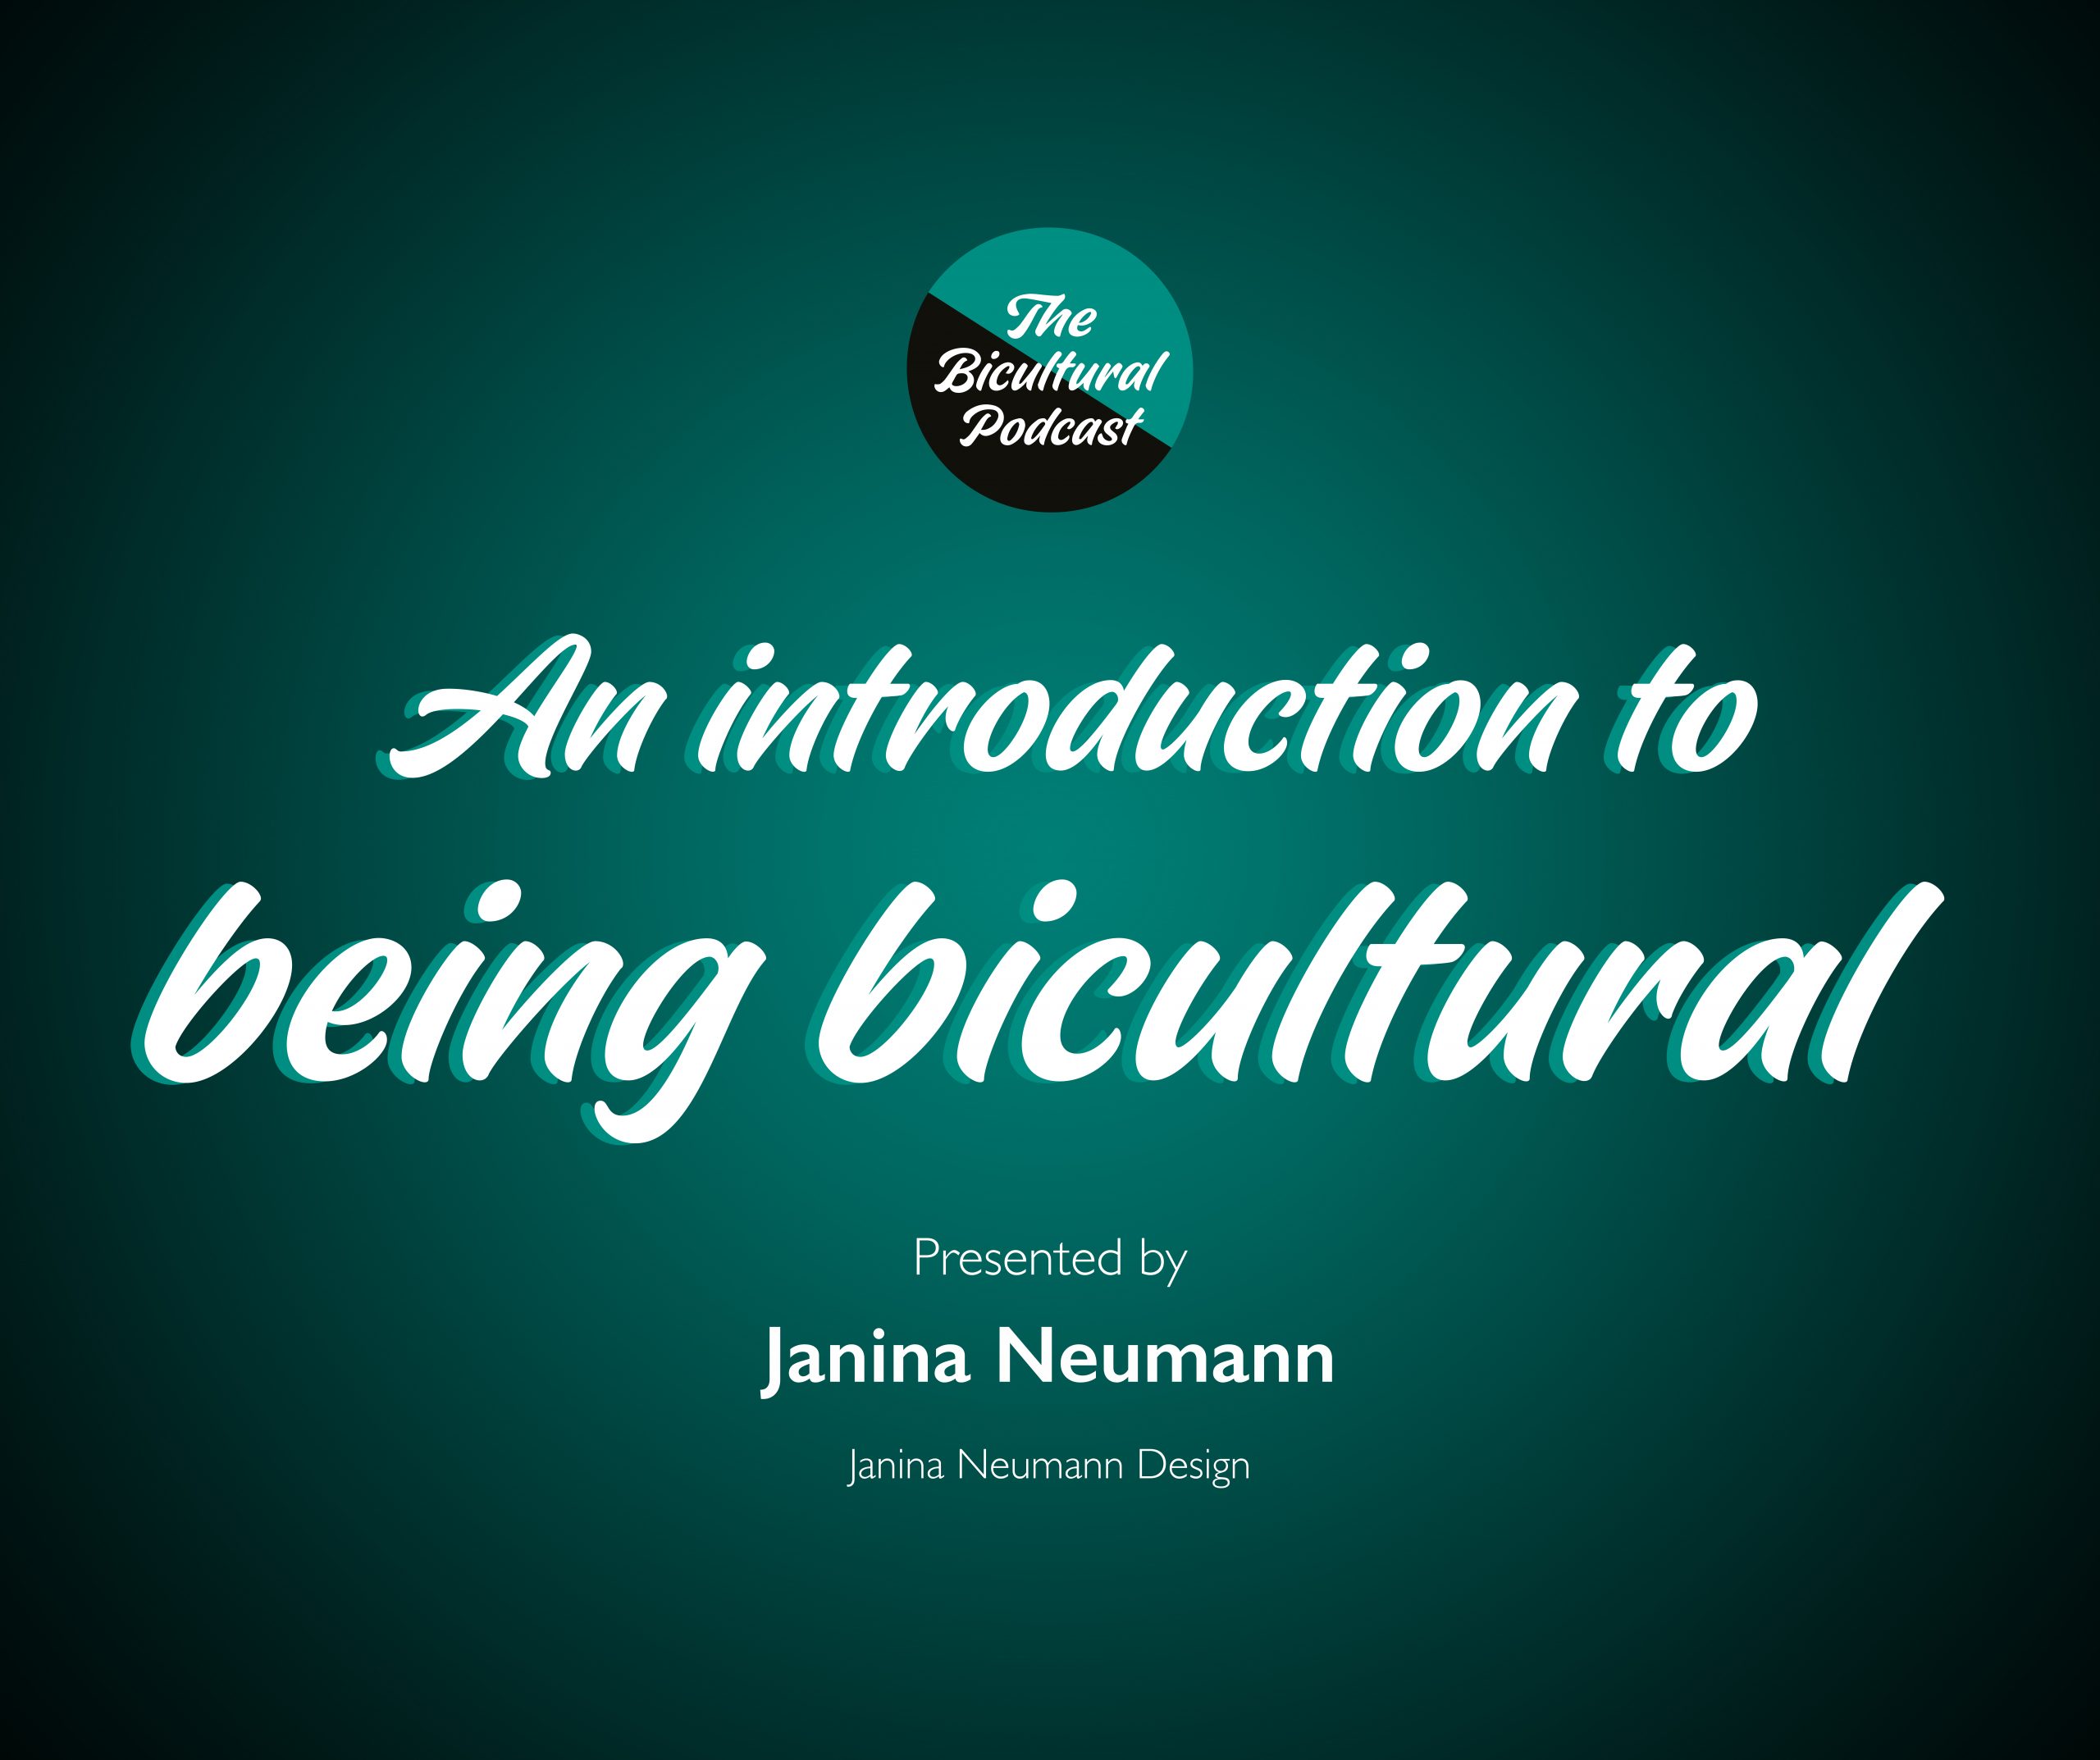 The Bicultural Podcast logo, text 'An introduction to being bicultural'